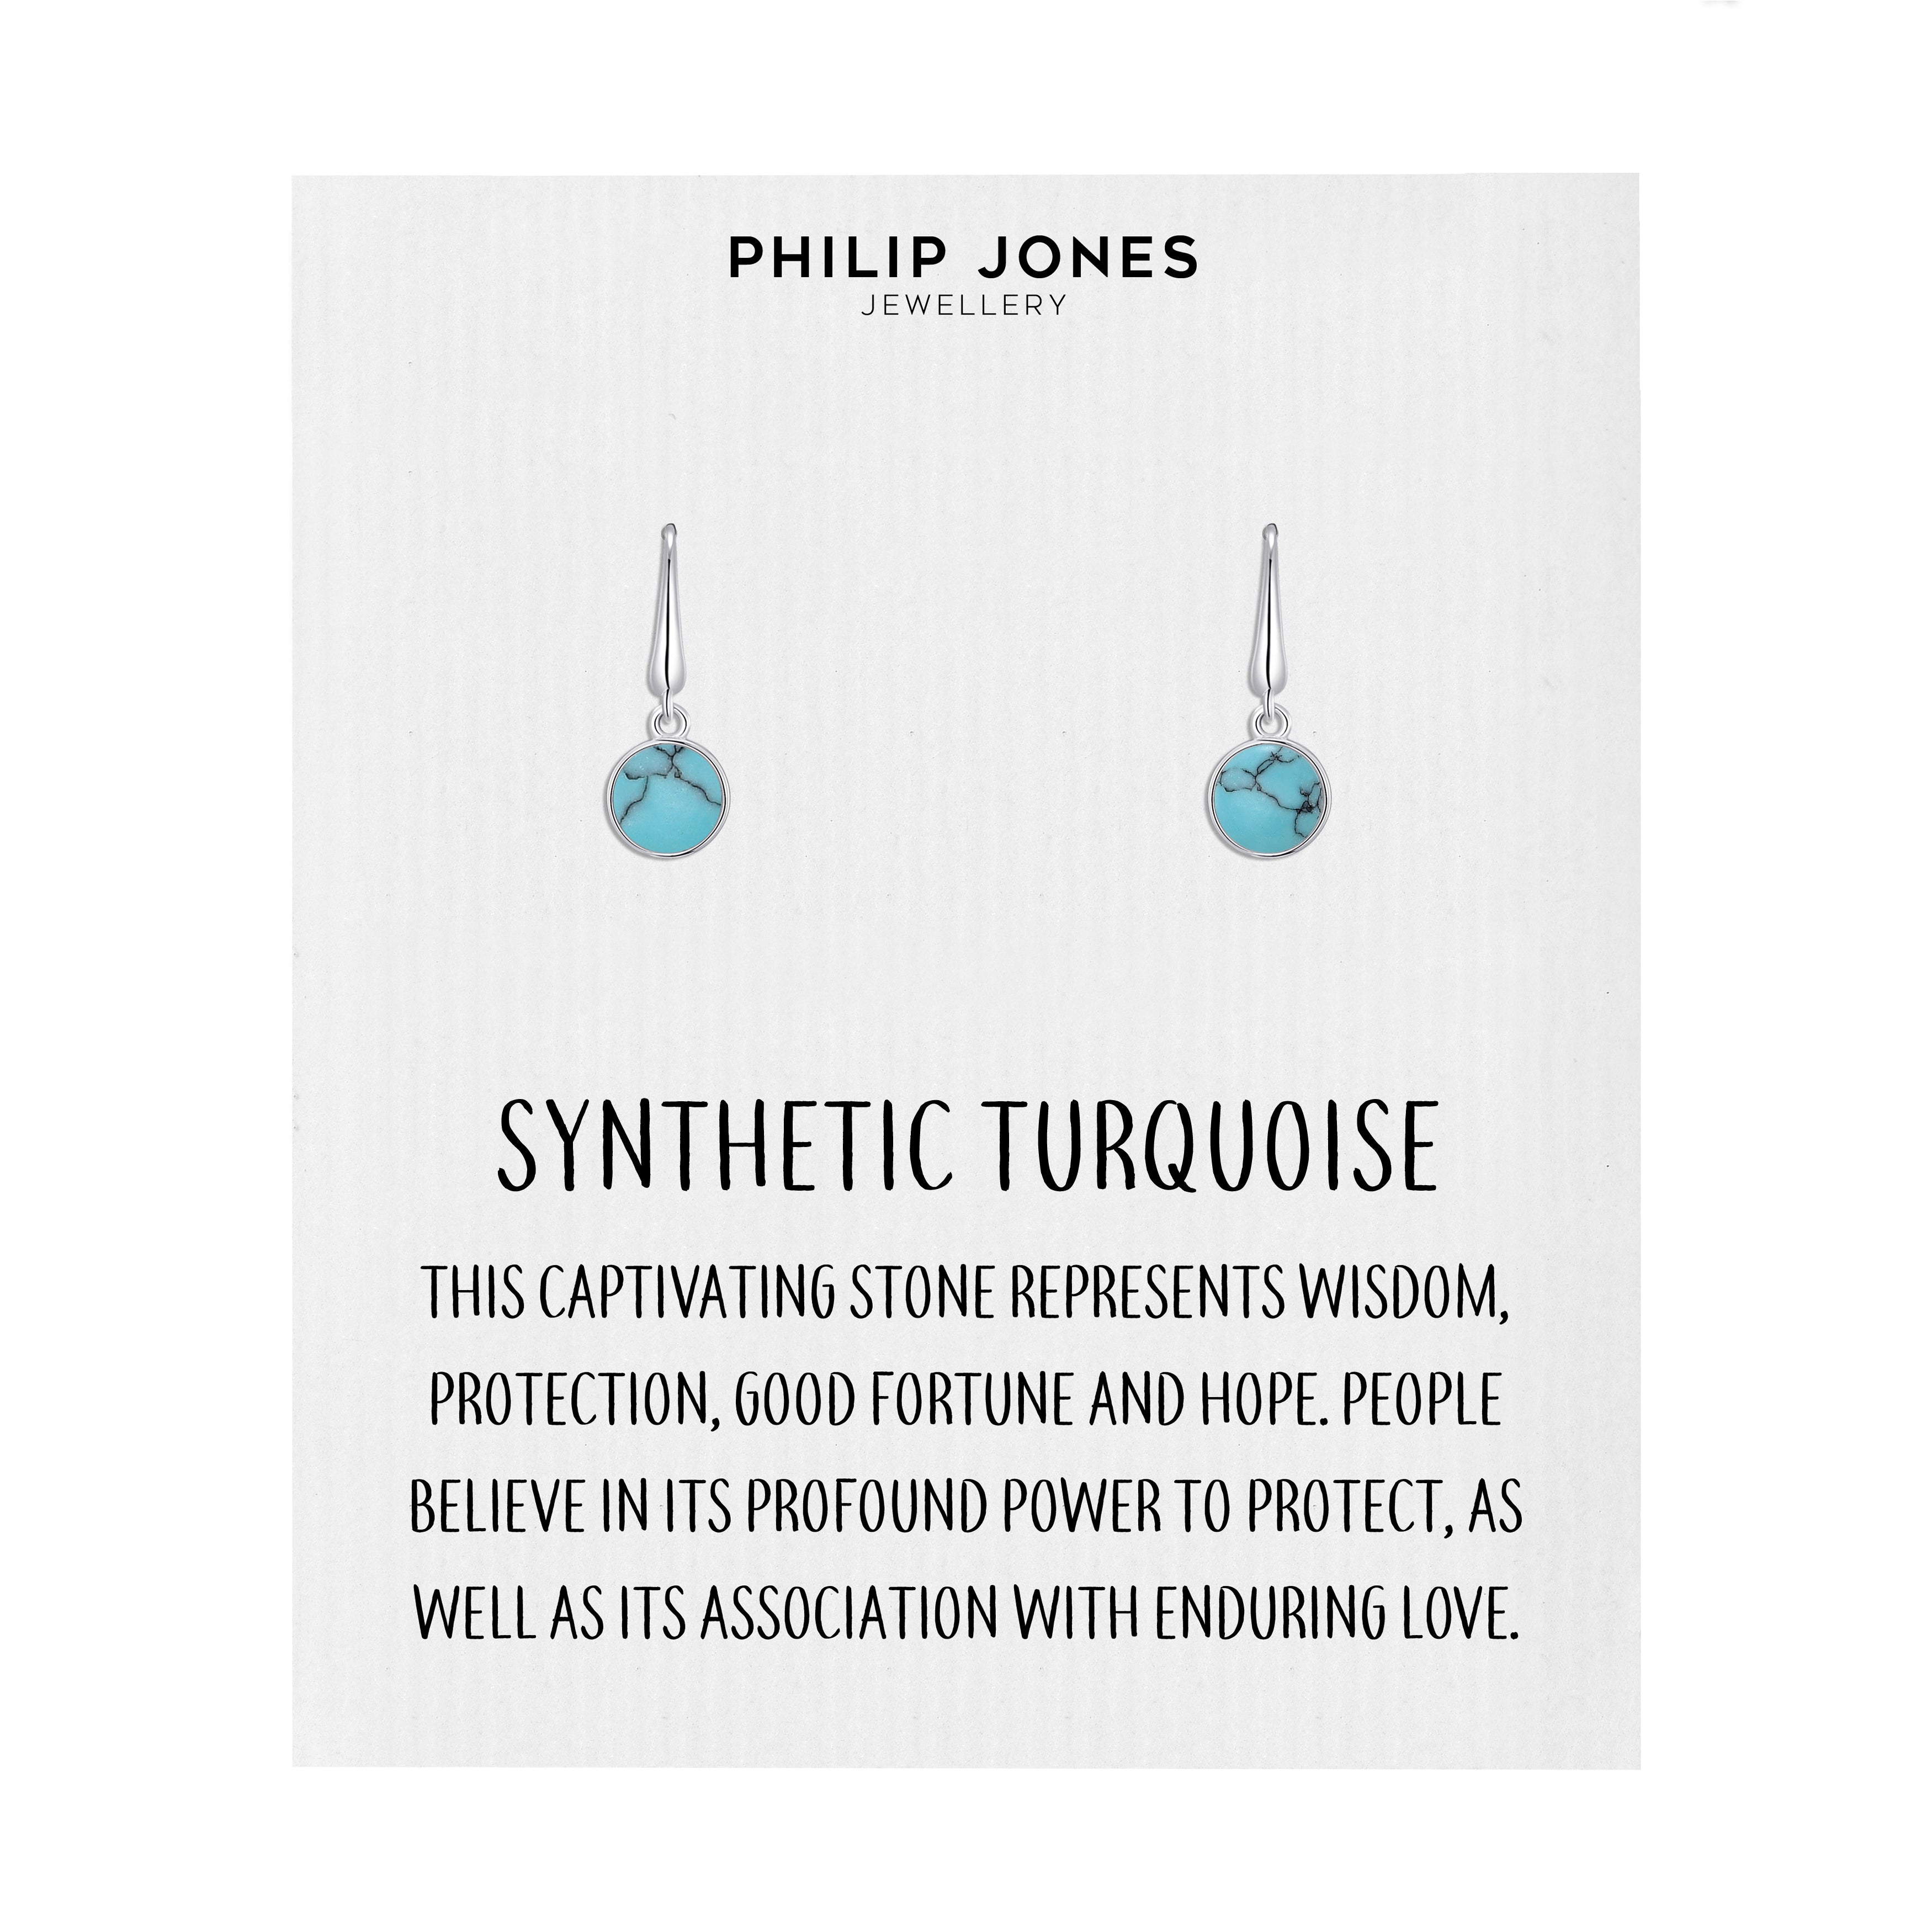 Synthetic Turquoise Drop Earrings with Quote Card by Philip Jones Jewellery